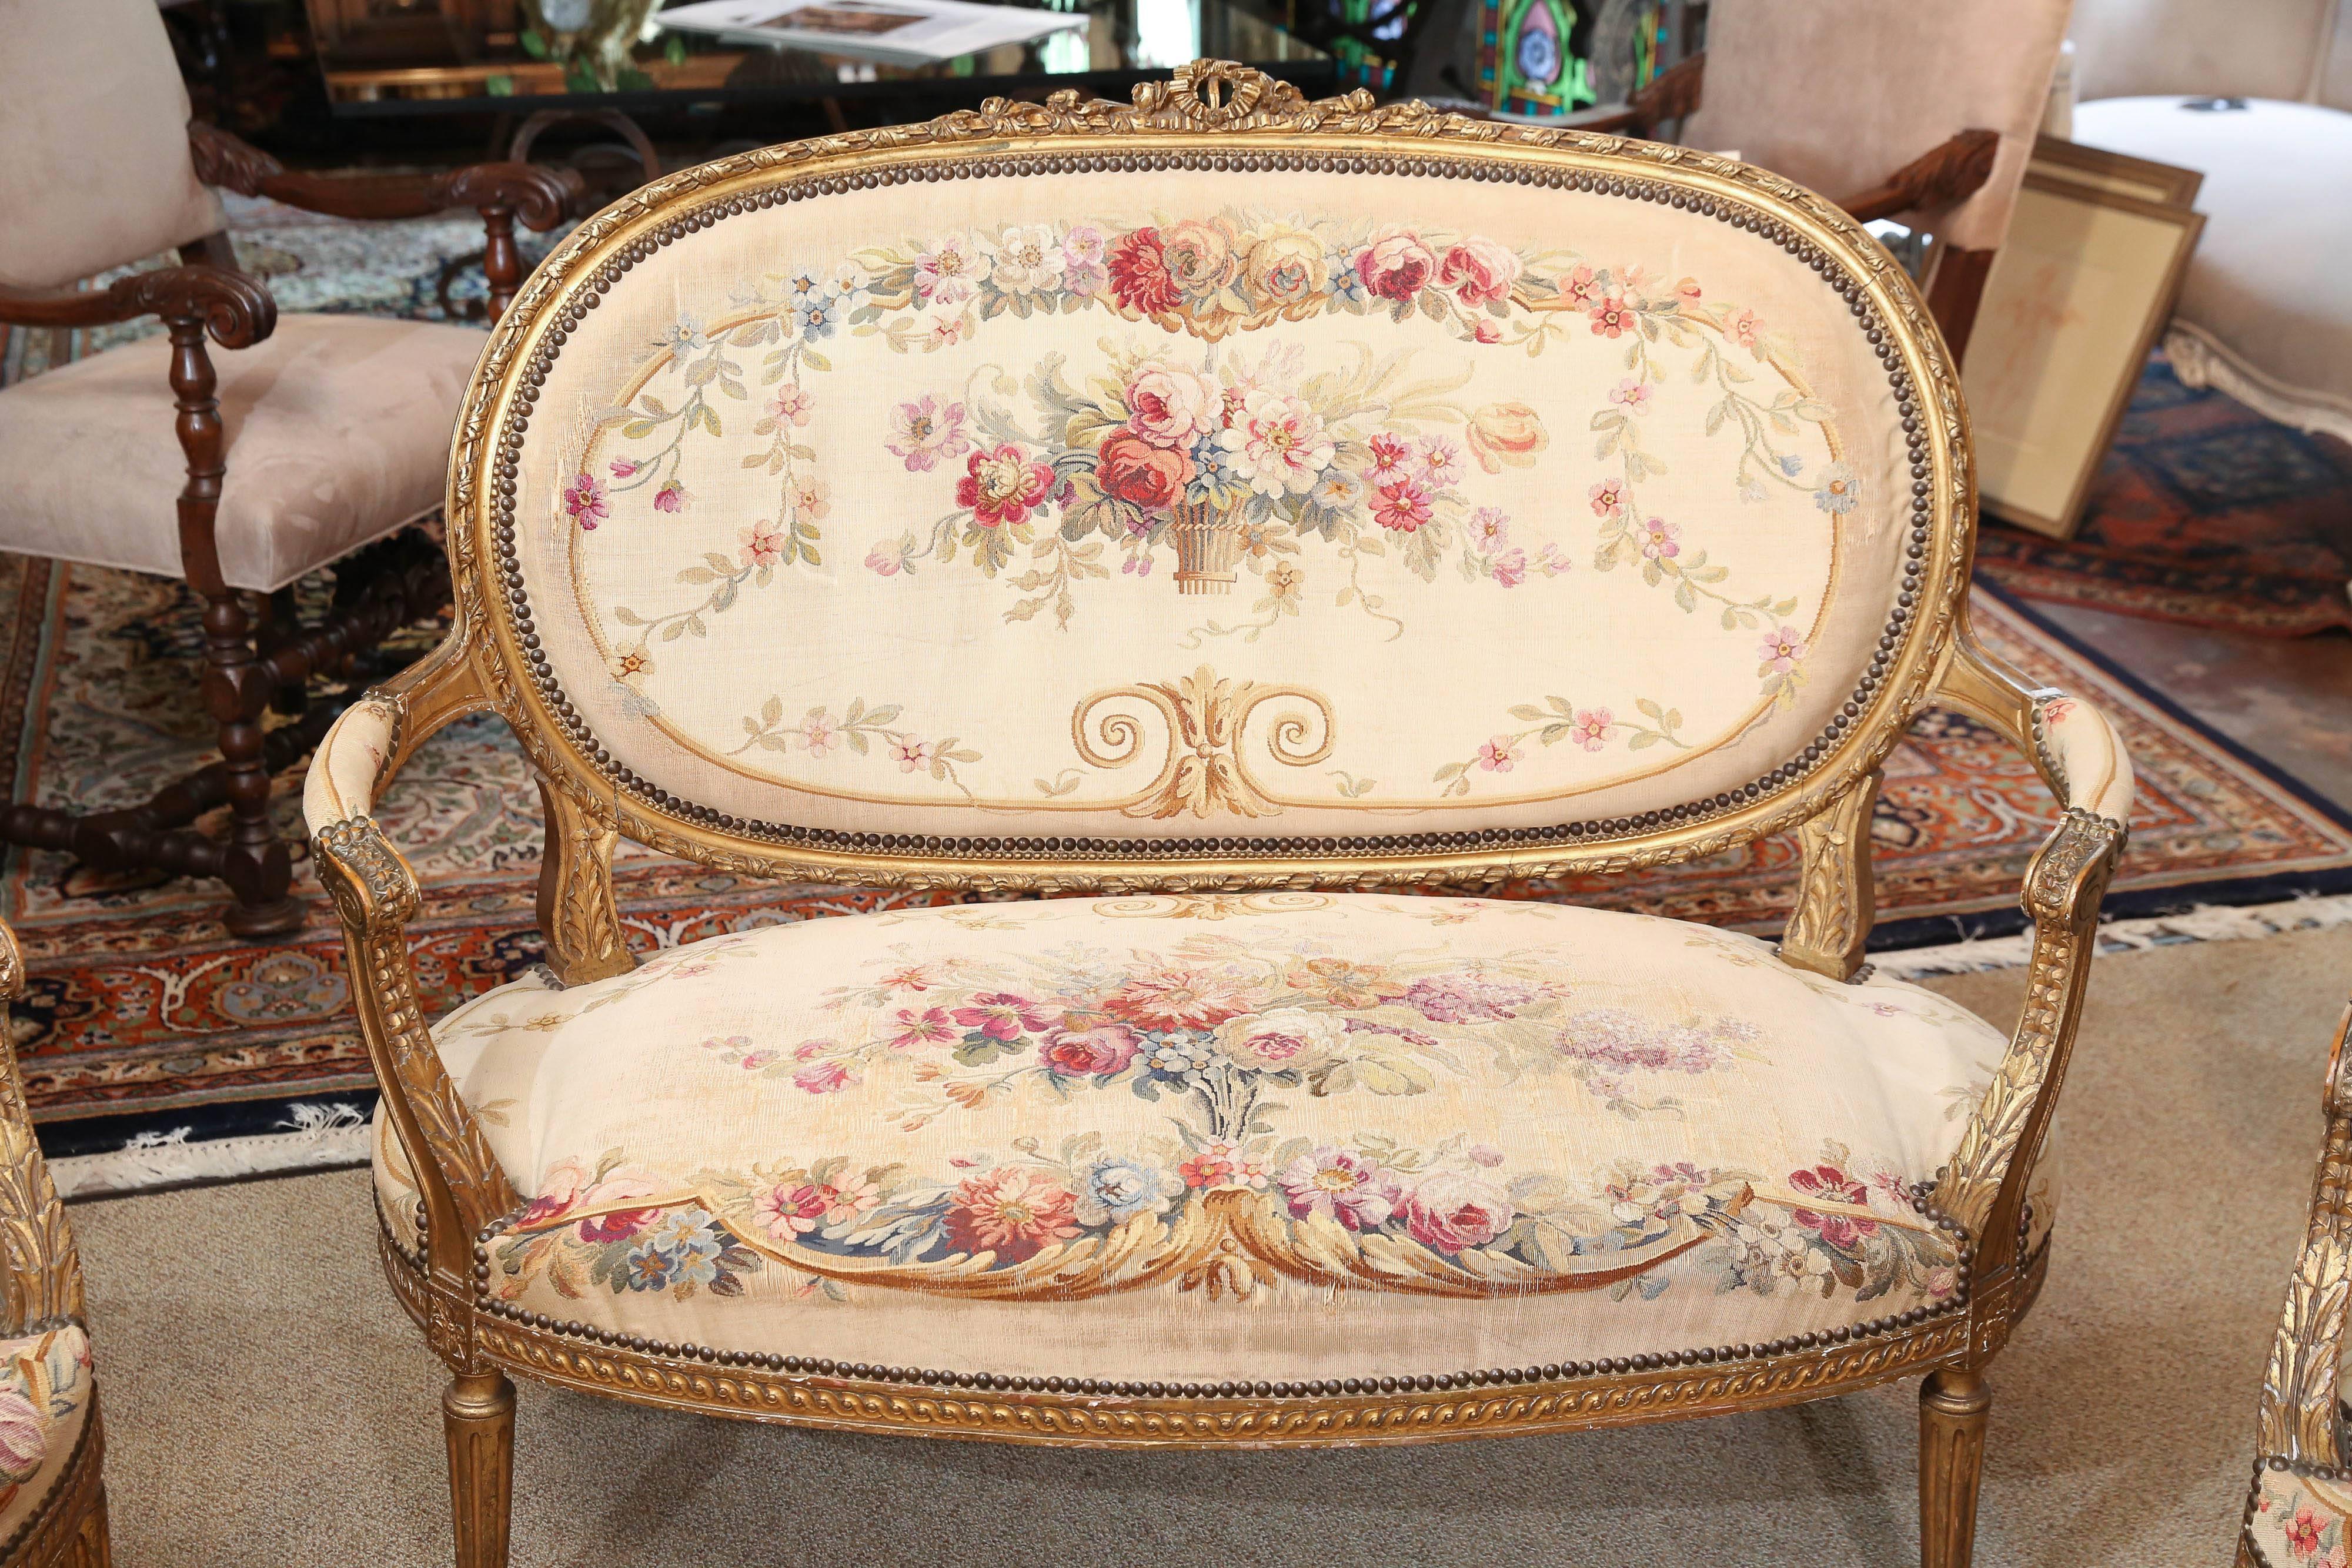 Lovely giltwood settee with matching armchairs.
Aubusson original upholstery in a floral pattern.
Gold background color with a rosy red and lavender
flowers. Oval shaped backs. Original gilding with wear
commensurate with age. The upholstery is